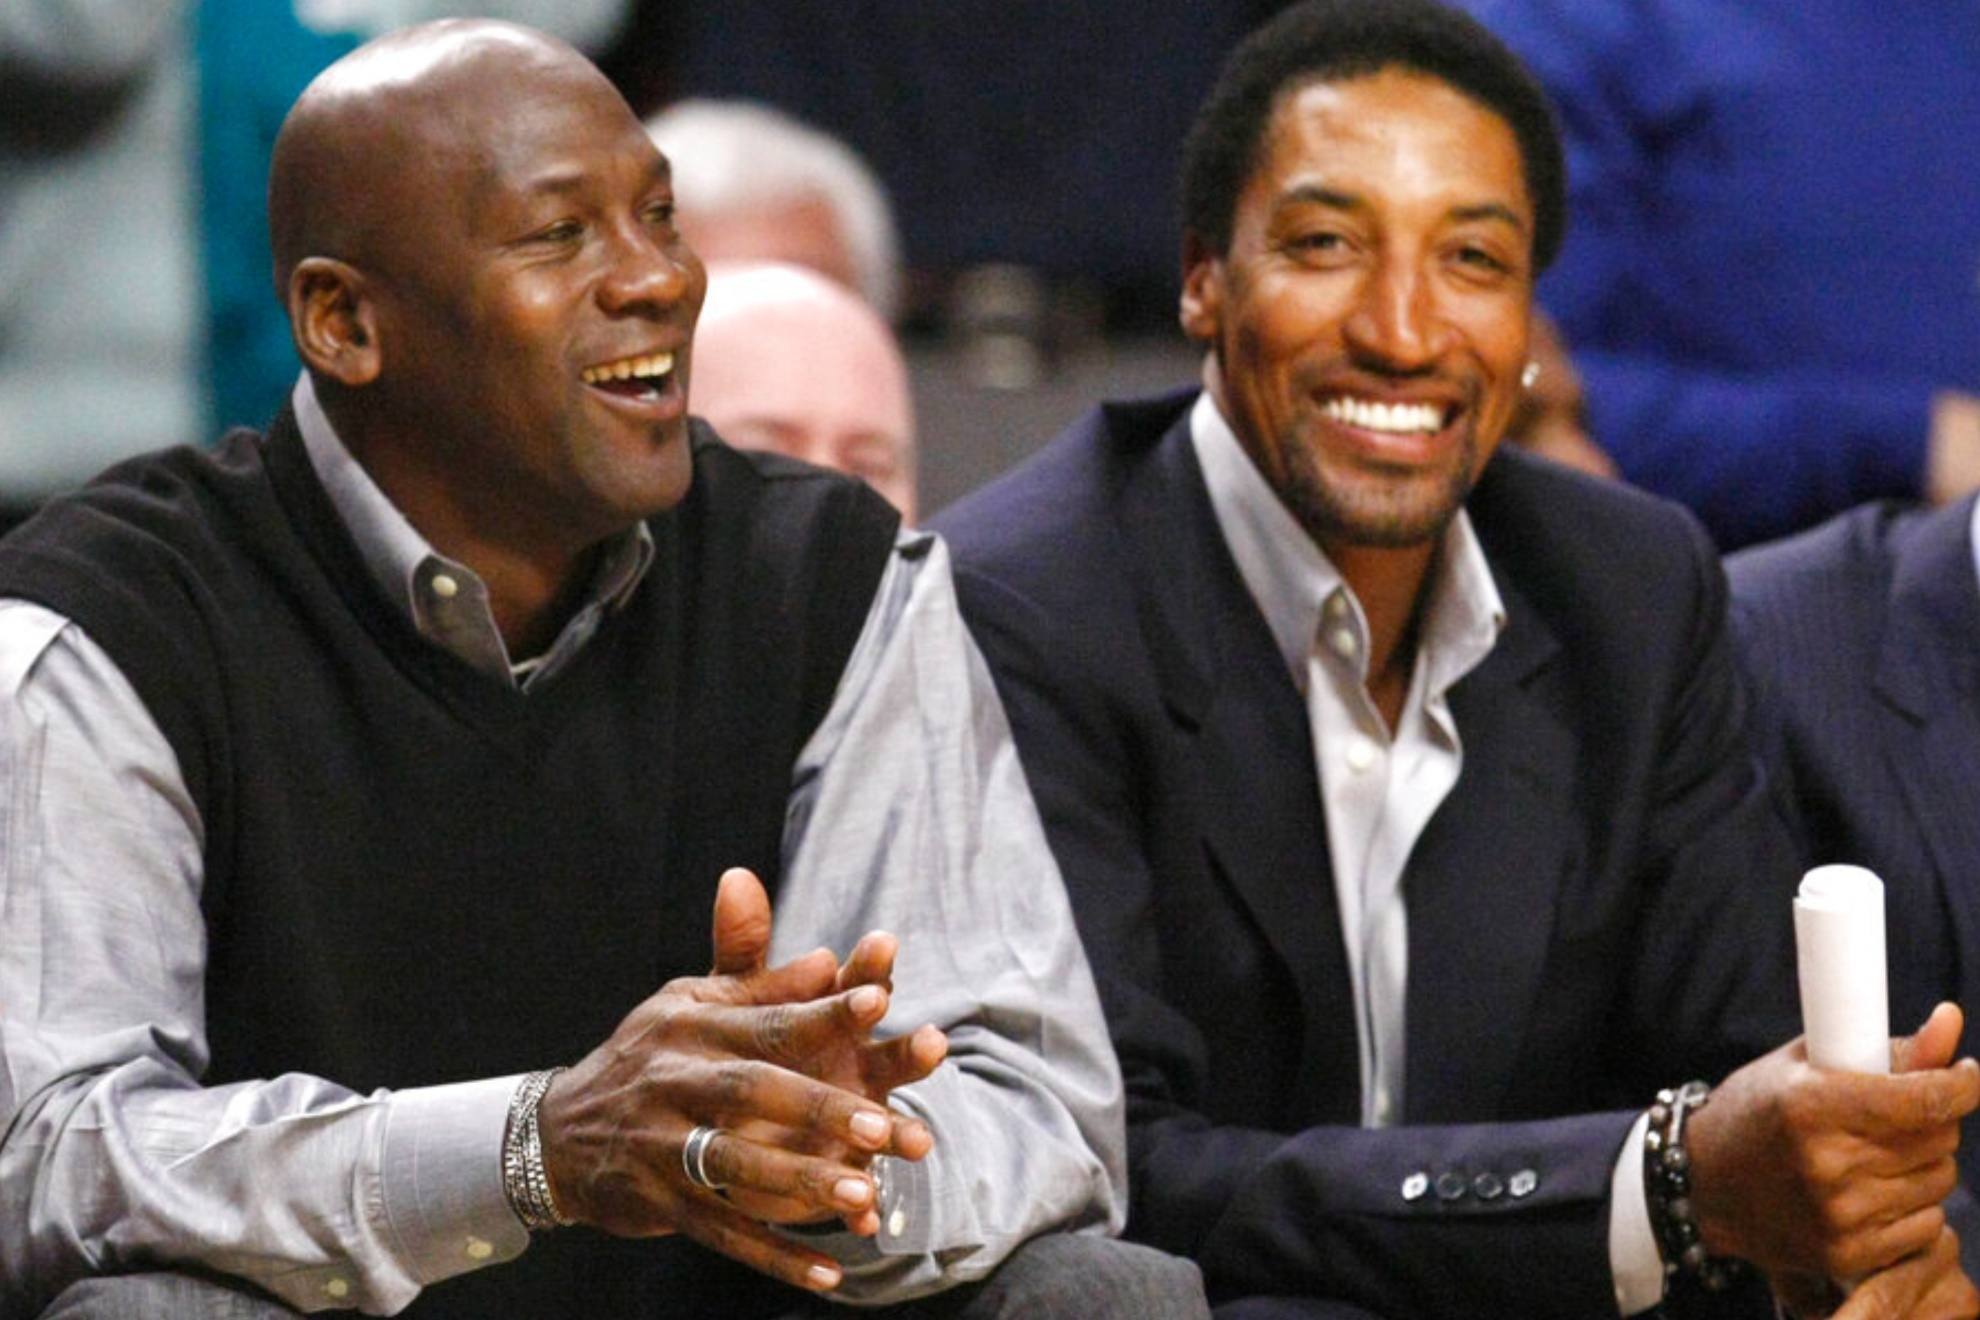 Michael Jordan and Scottie Pippen will be honored by the Chicago Bulls in January